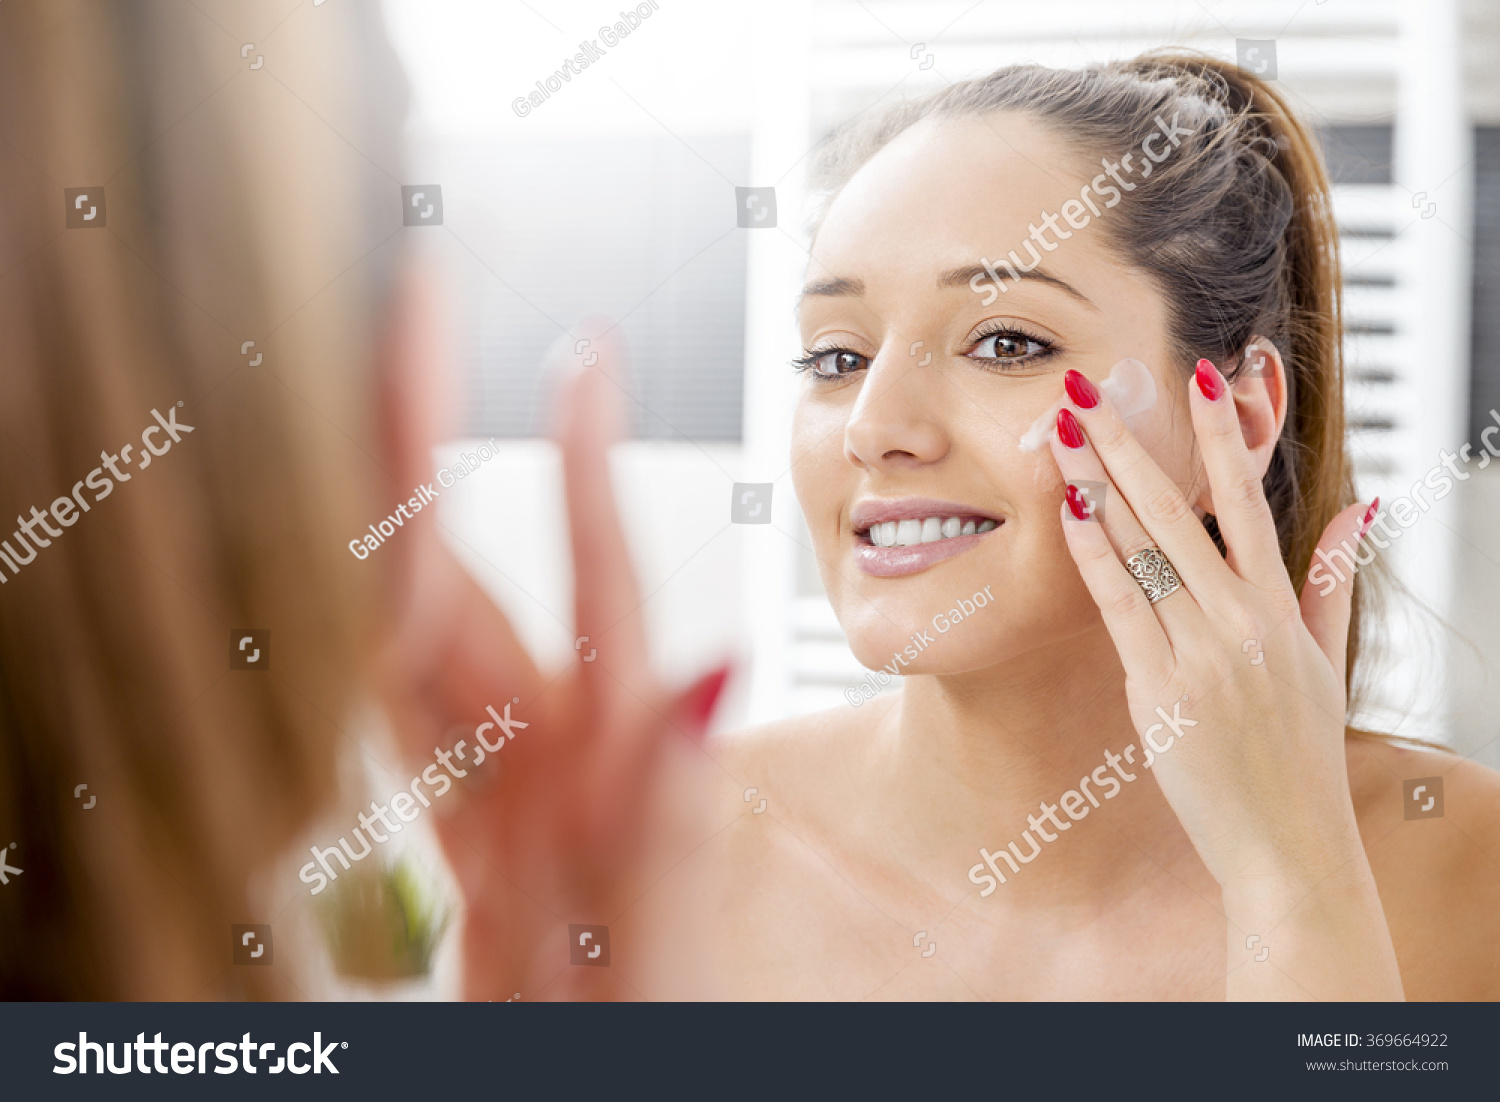 Attractive girl putting anti-aging cream on her face #369664922